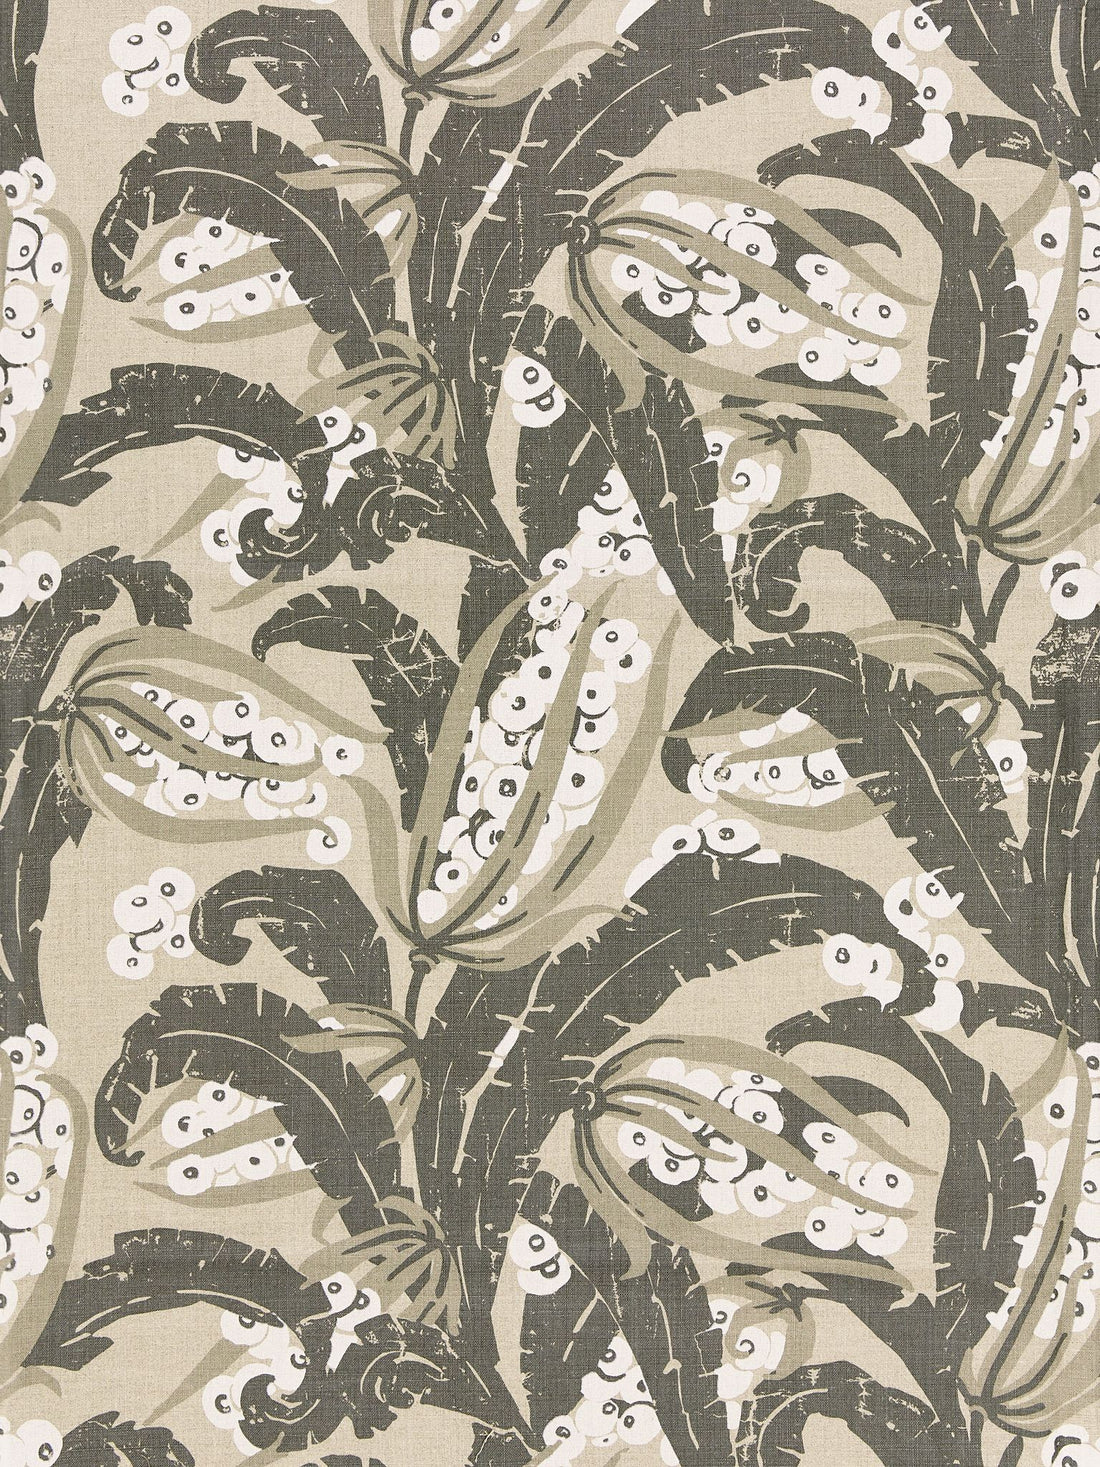 Tropique fabric in stone color - pattern number GW 000316609 - by Scalamandre in the Grey Watkins collection